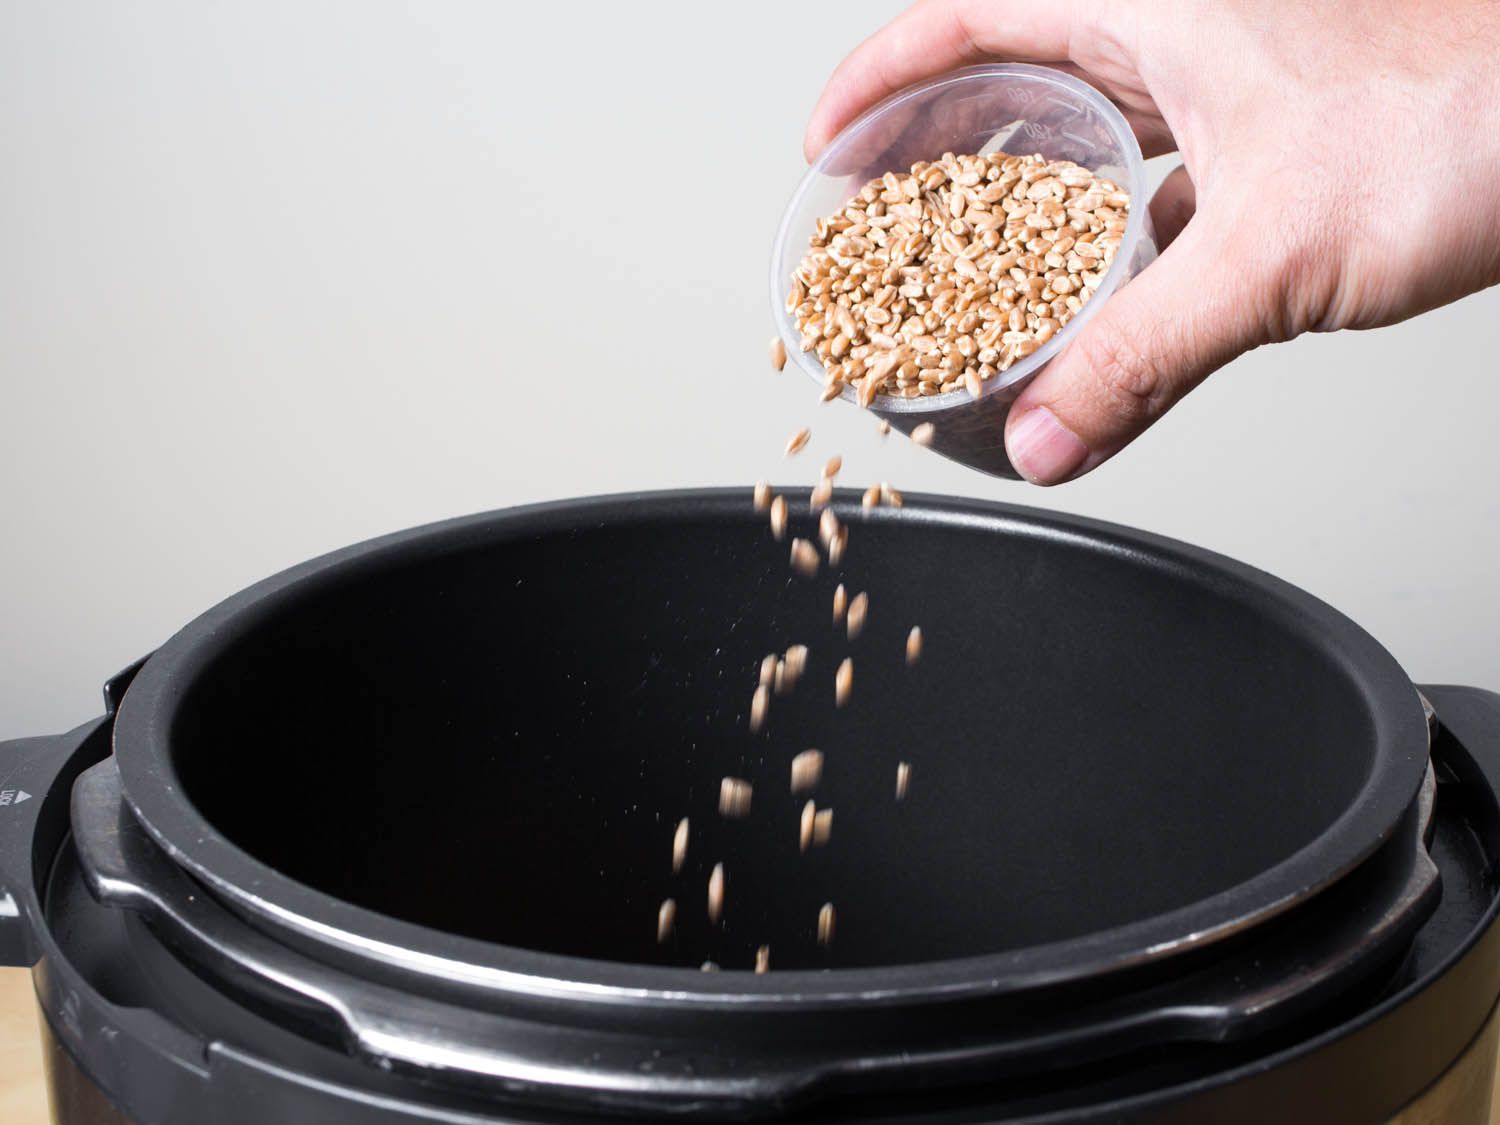 How Long To Cook Barley In An Electric Pressure Cooker